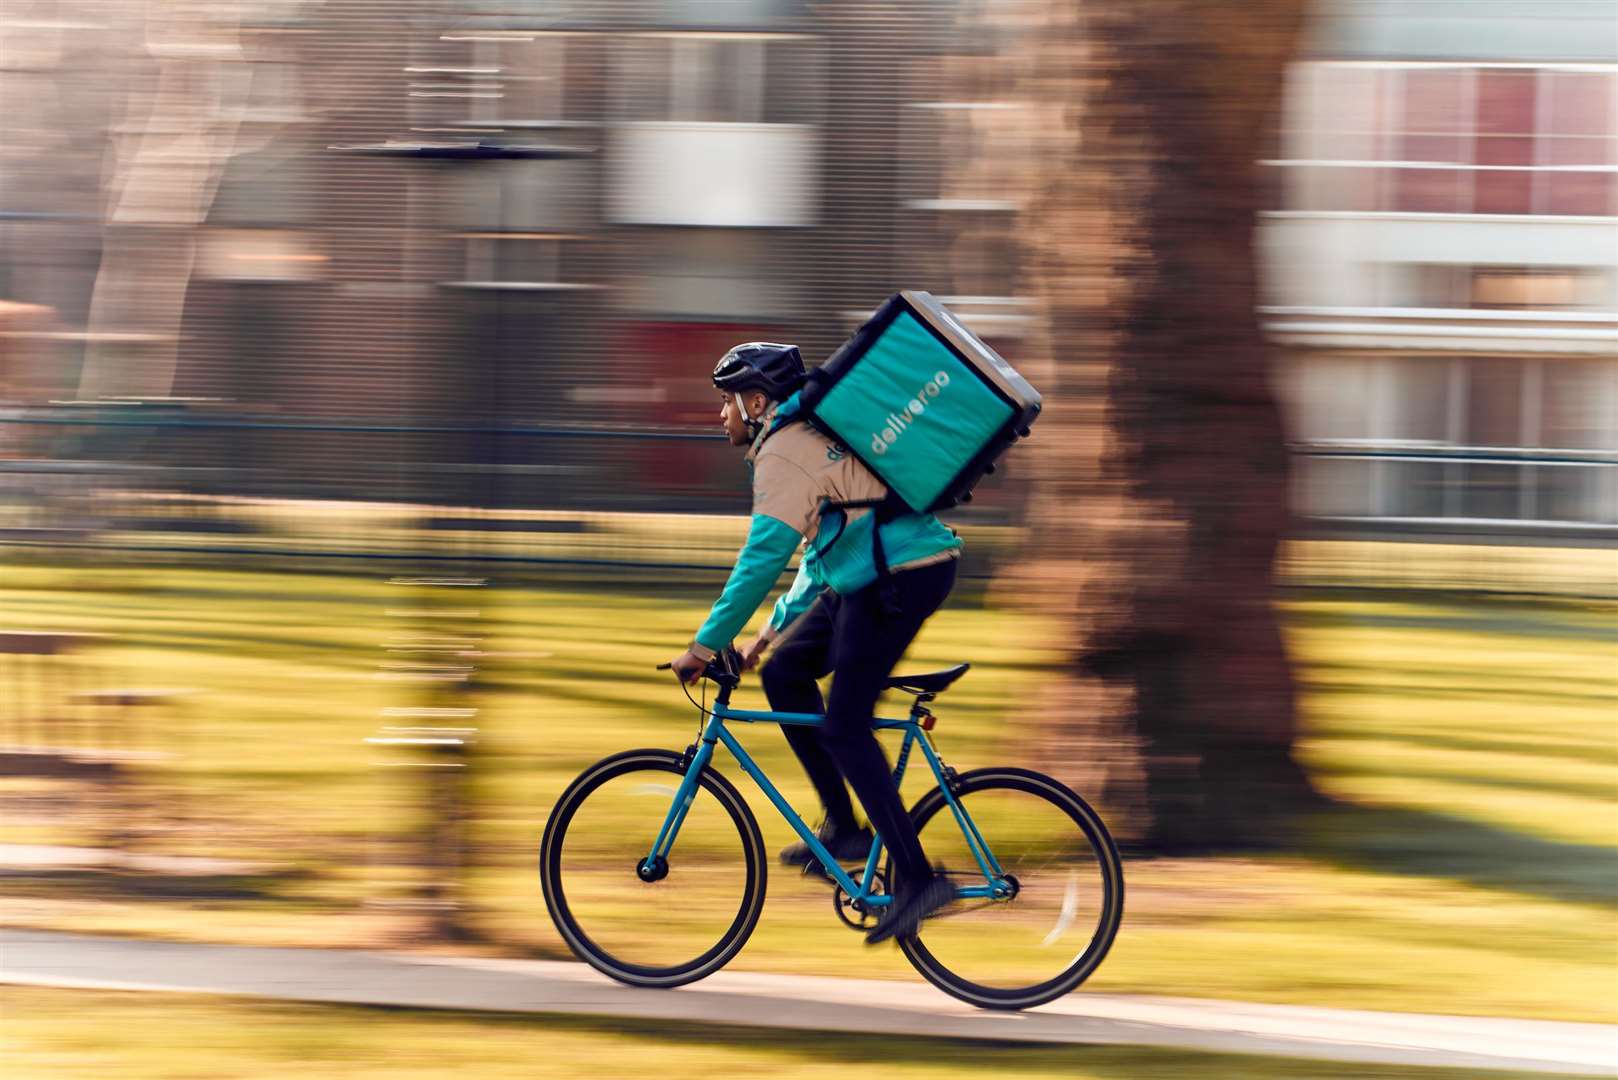 Deliveroo is still looking to employ as many as 50 riders in Herne Bay